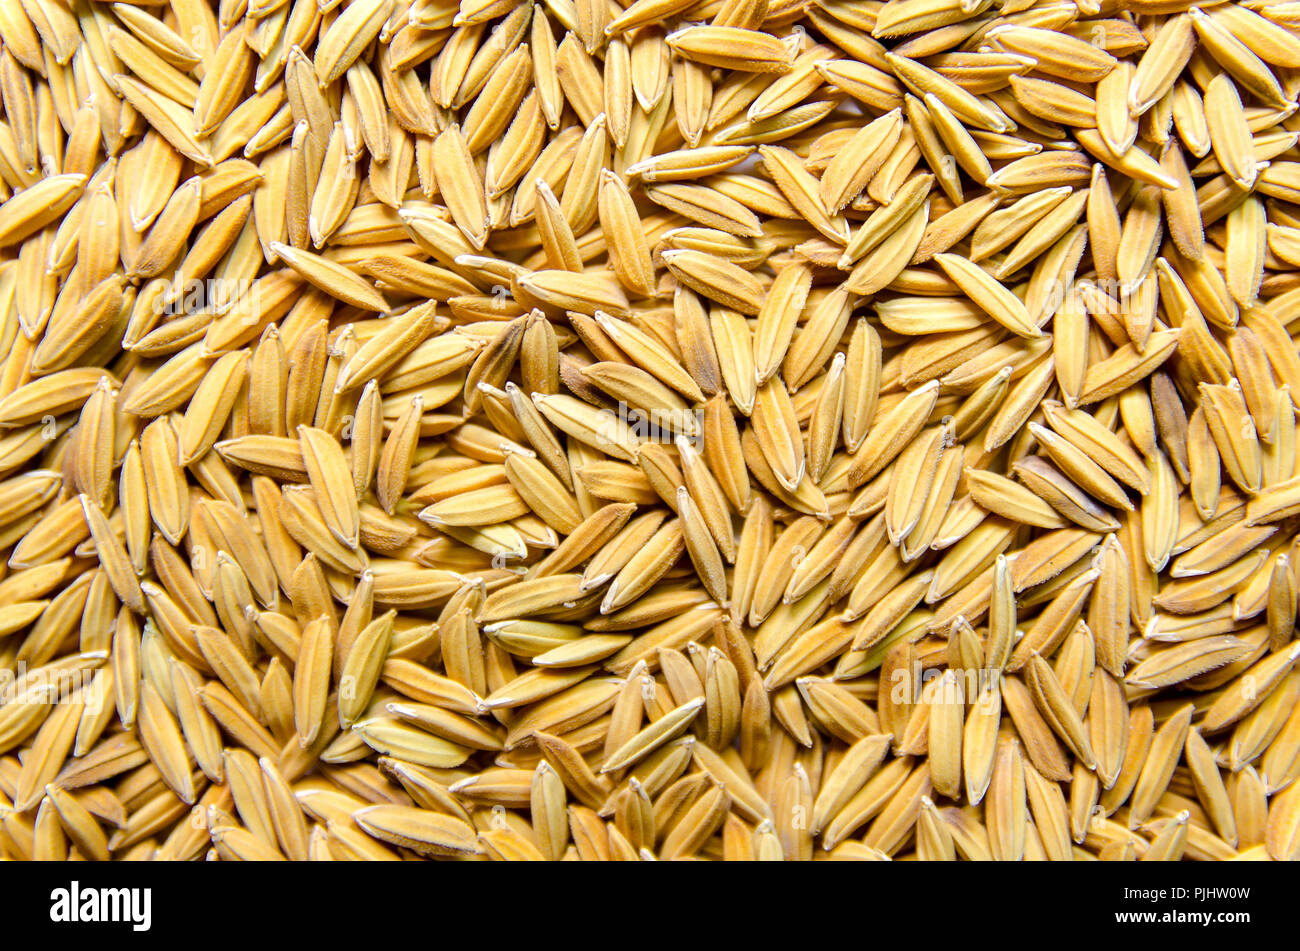 Top view of paddy rice and rice seed on the floor, Background and wallpaper by pile of paddy rice, Close-up of brown rice grain and rice pile. Stock Photo